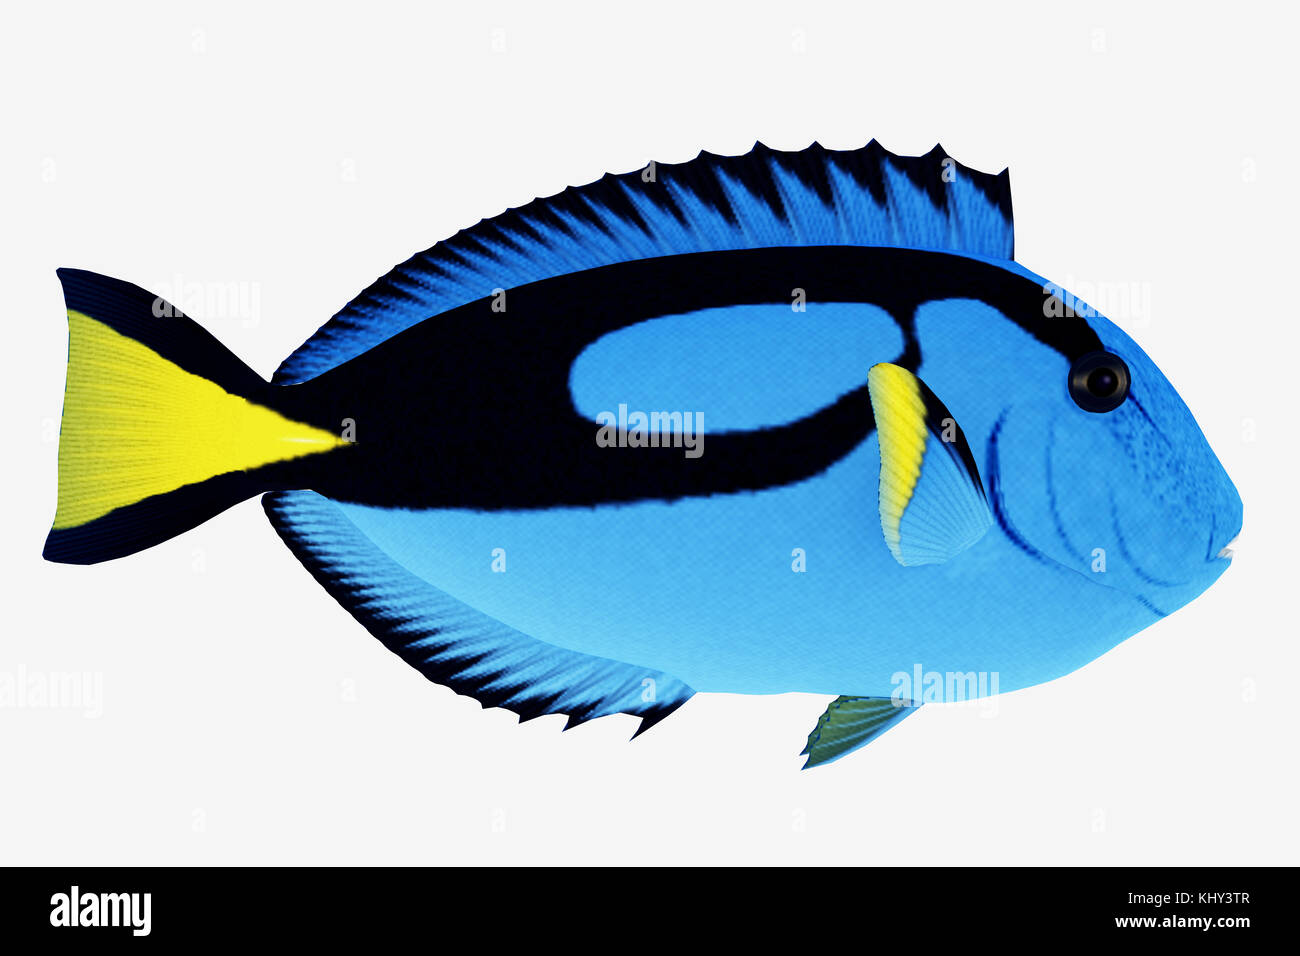 Blue Tang Fish - The Blue Tang Fish is a saltwater species reef fish in tropical regions of Indo-Pacific oceans and eat plankton and algae. Stock Photo